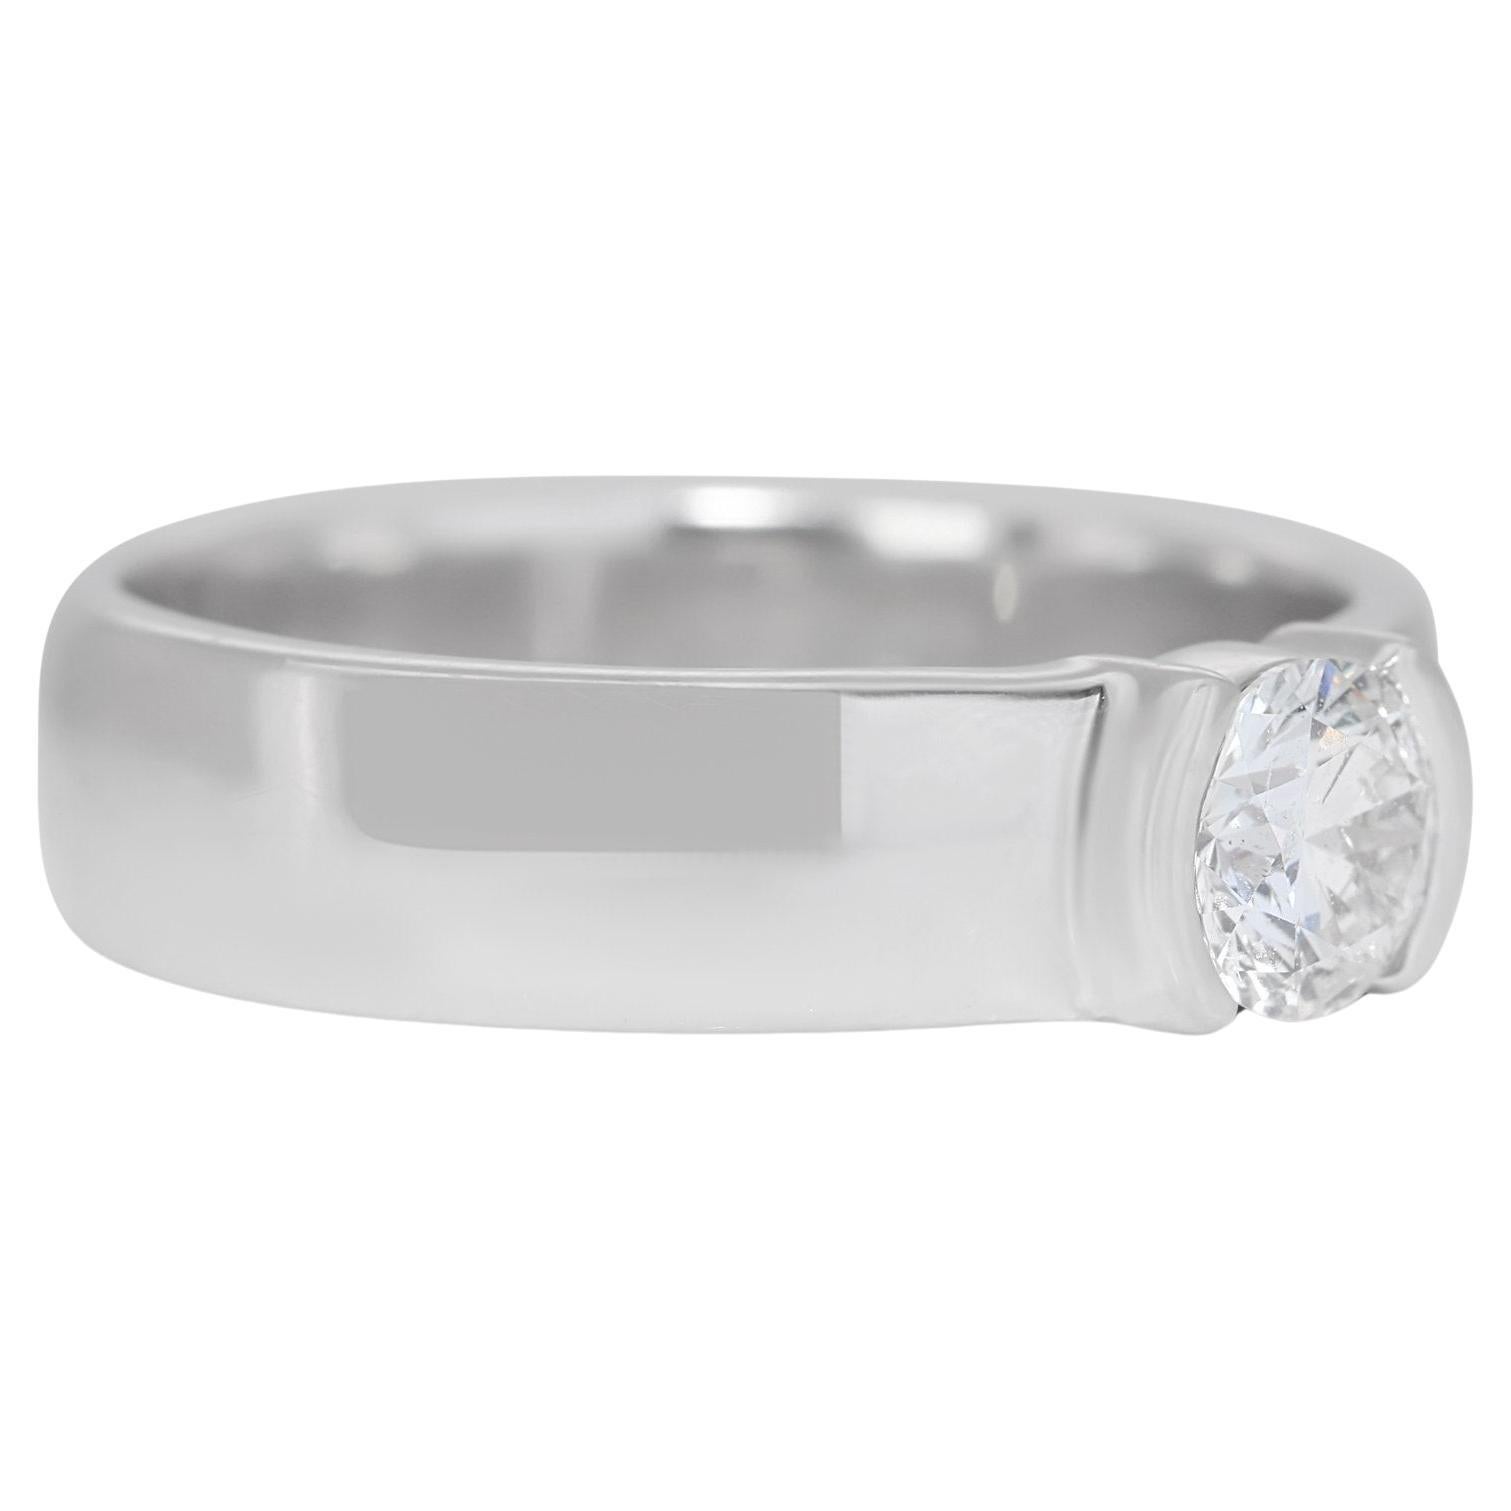 Sophisticated 0.70ct Diamond Solitaire Ring in 18k White Gold - GIA Certified

Celebrate the essence of elegance with this classic solitaire diamond ring, masterfully crafted from 18k white gold. Centered with a luminous 0.70-carat round diamond.